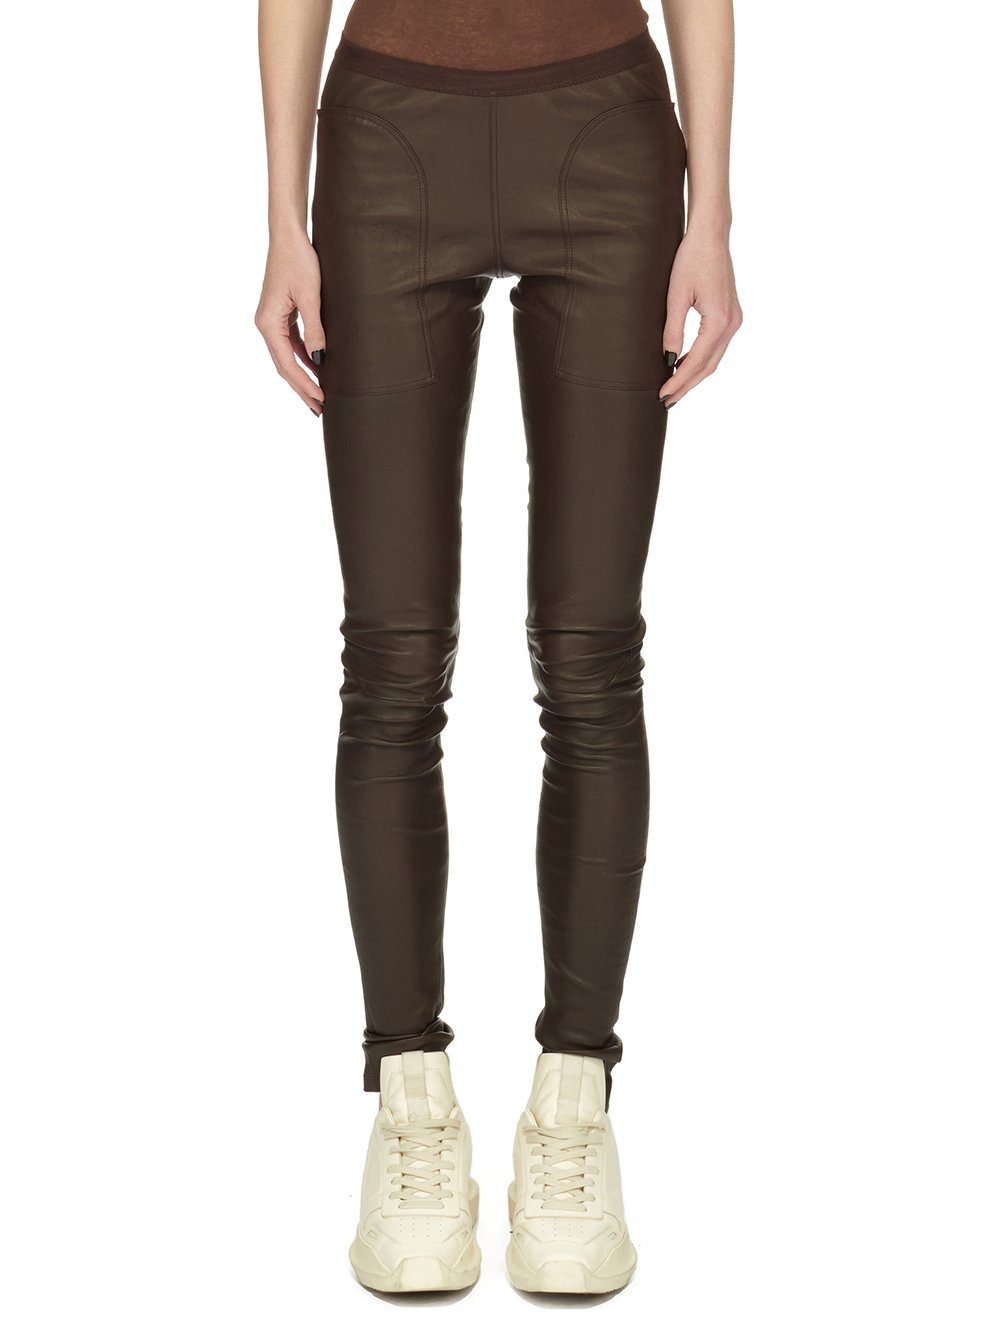 RICK OWENS FW23 LUXOR LEGGINGS IN BROWN STRETCH LAMB LEATHER